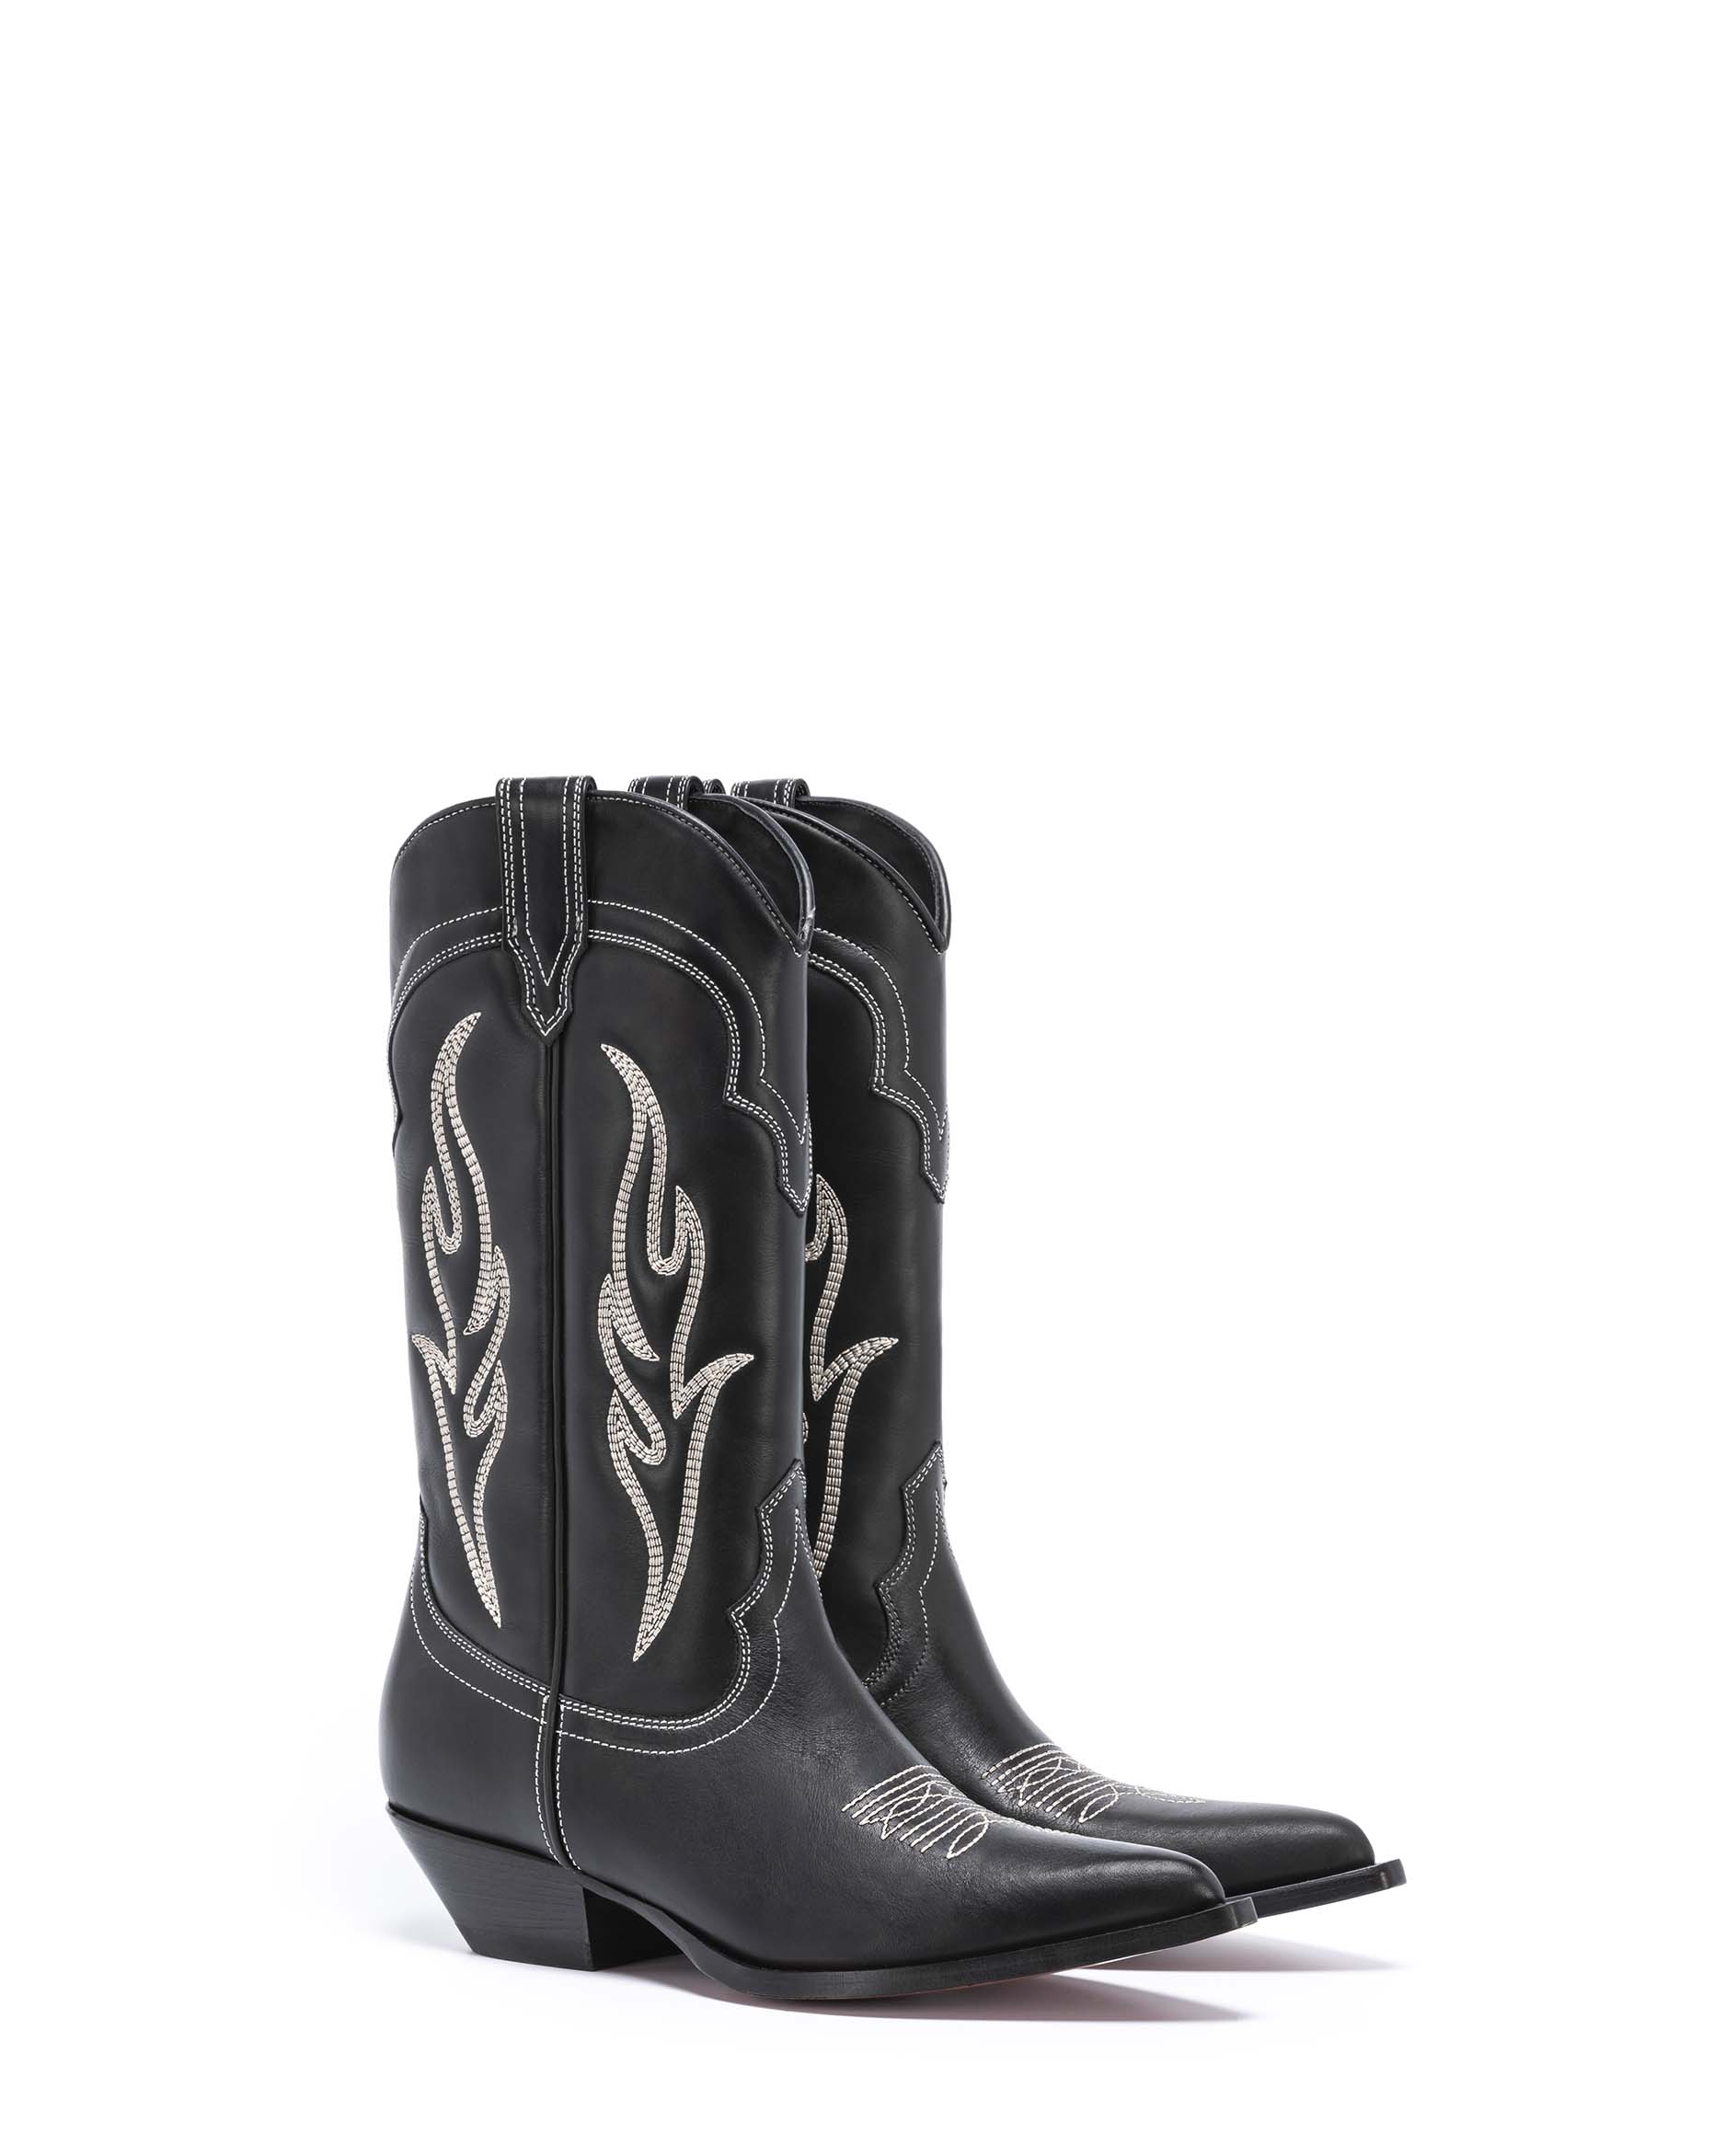 SANTA FE Men's Cowboy Boots in Black Calfskin | Off-White Embroidery_Front_01